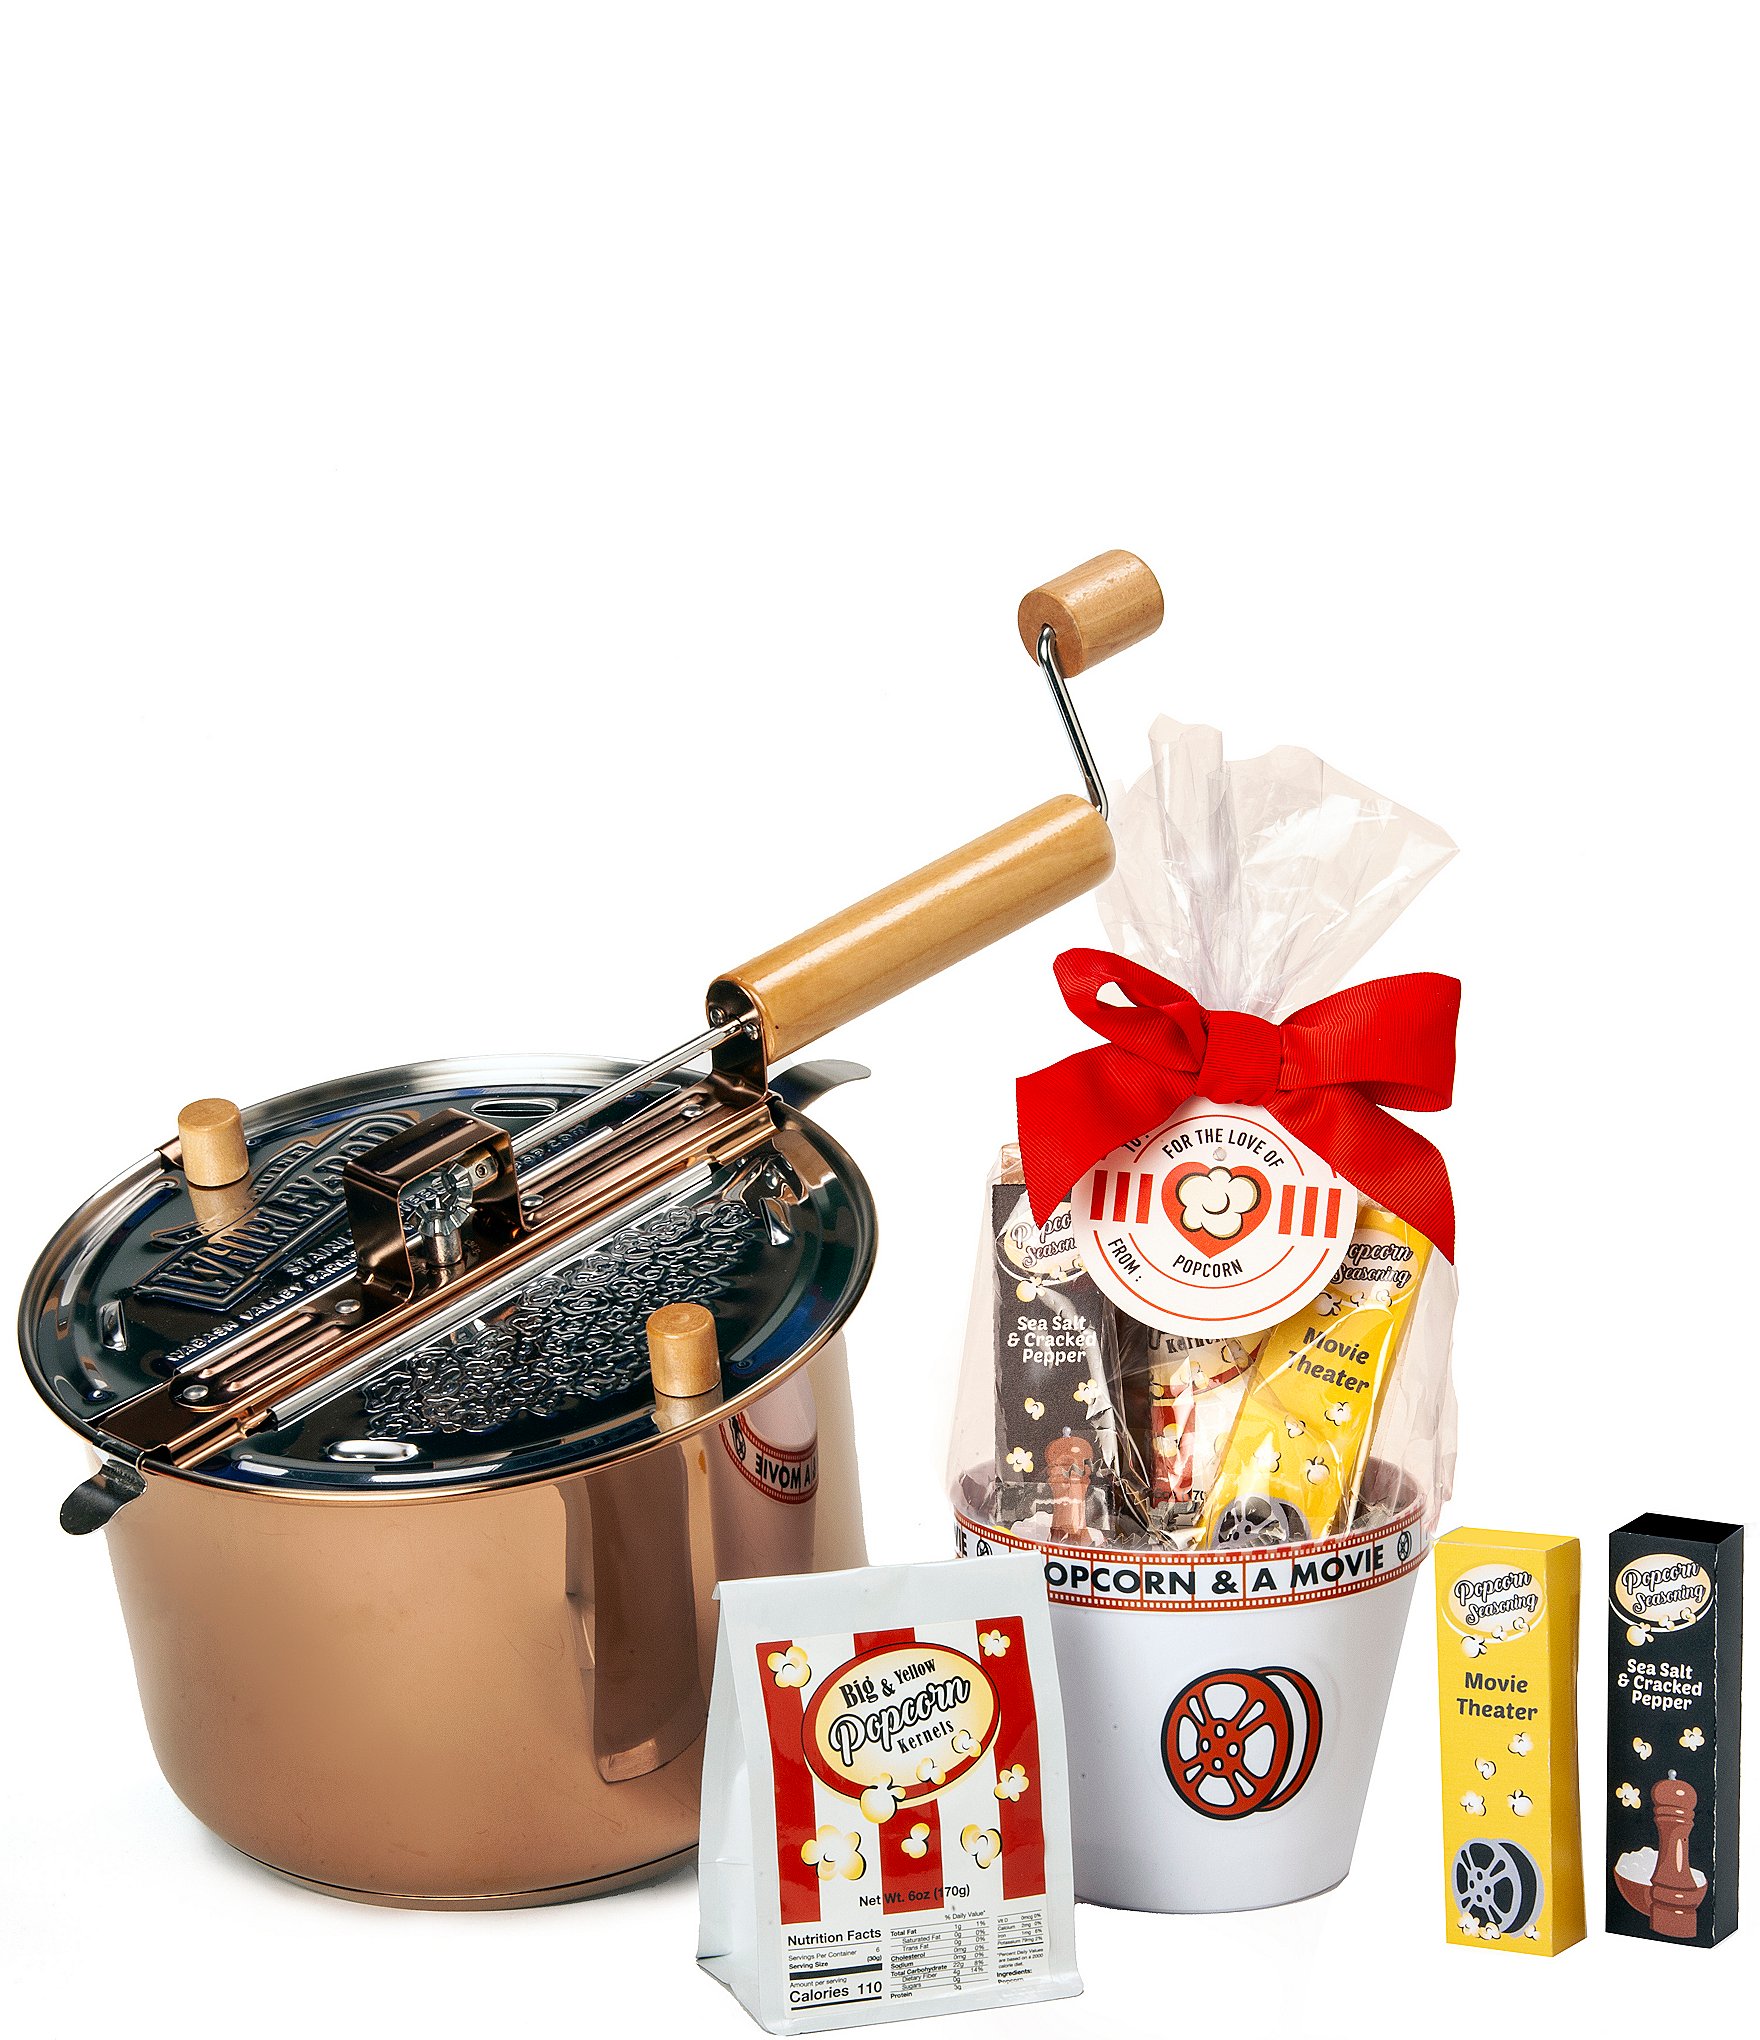 https://dimg.dillards.com/is/image/DillardsZoom/zoom/wabash-valley-farms-copper-plated-stainless-steel-whirley-pop-and-cello-popcorn-gift-set/20115339_zi.jpg